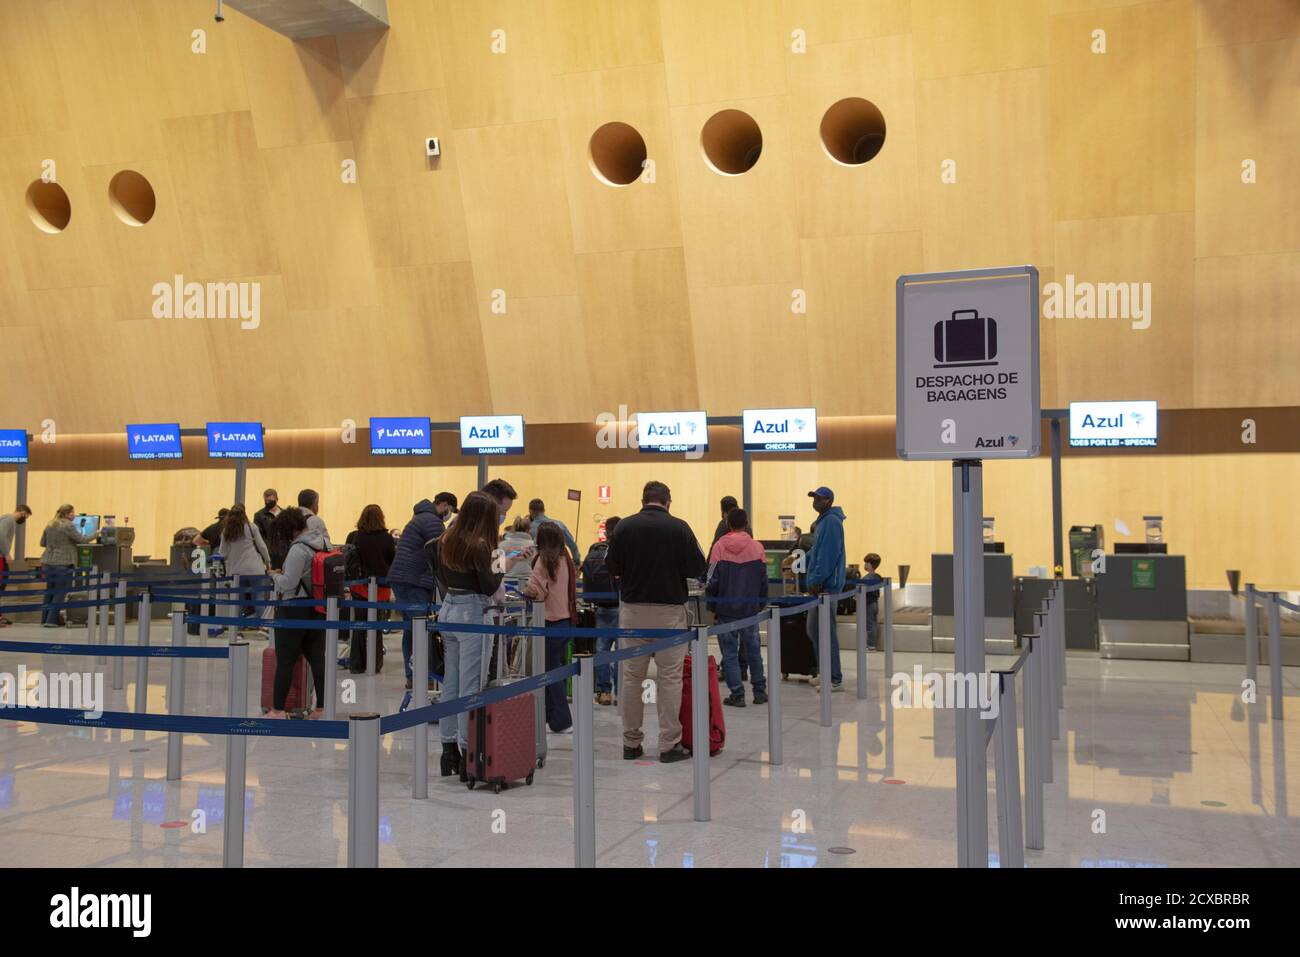 Florianopolis, Brazil. September 19, 2020: Queue to check baggage at the airport. People crowded during the pandemic. Written sign Checked baggage (De Stock Photo